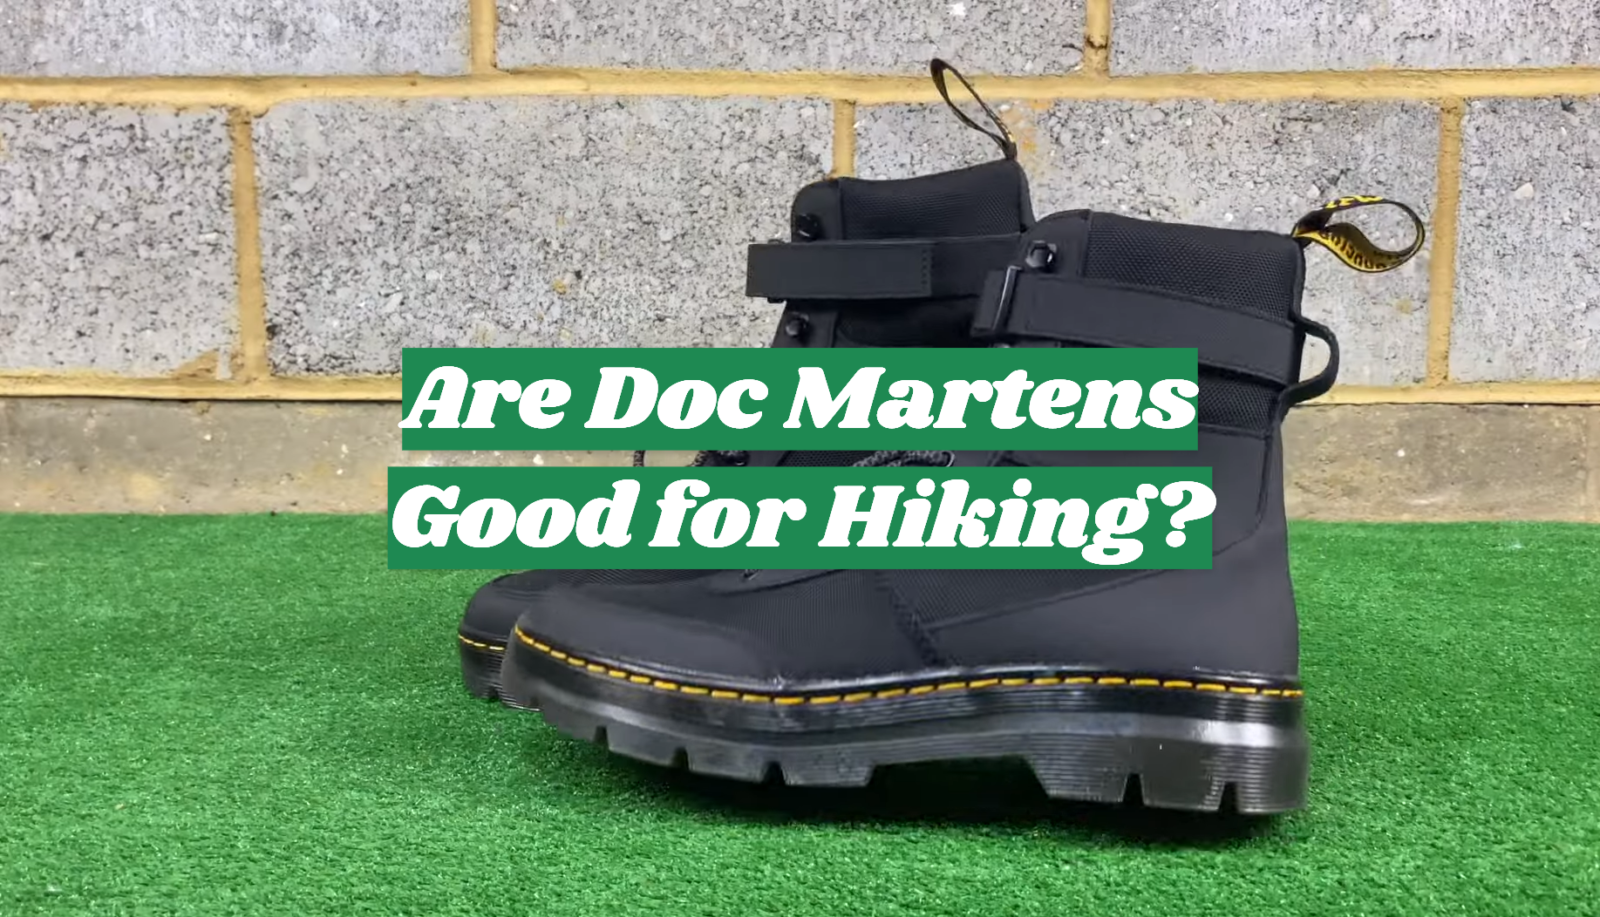 Are Doc Martens Good for Hiking?